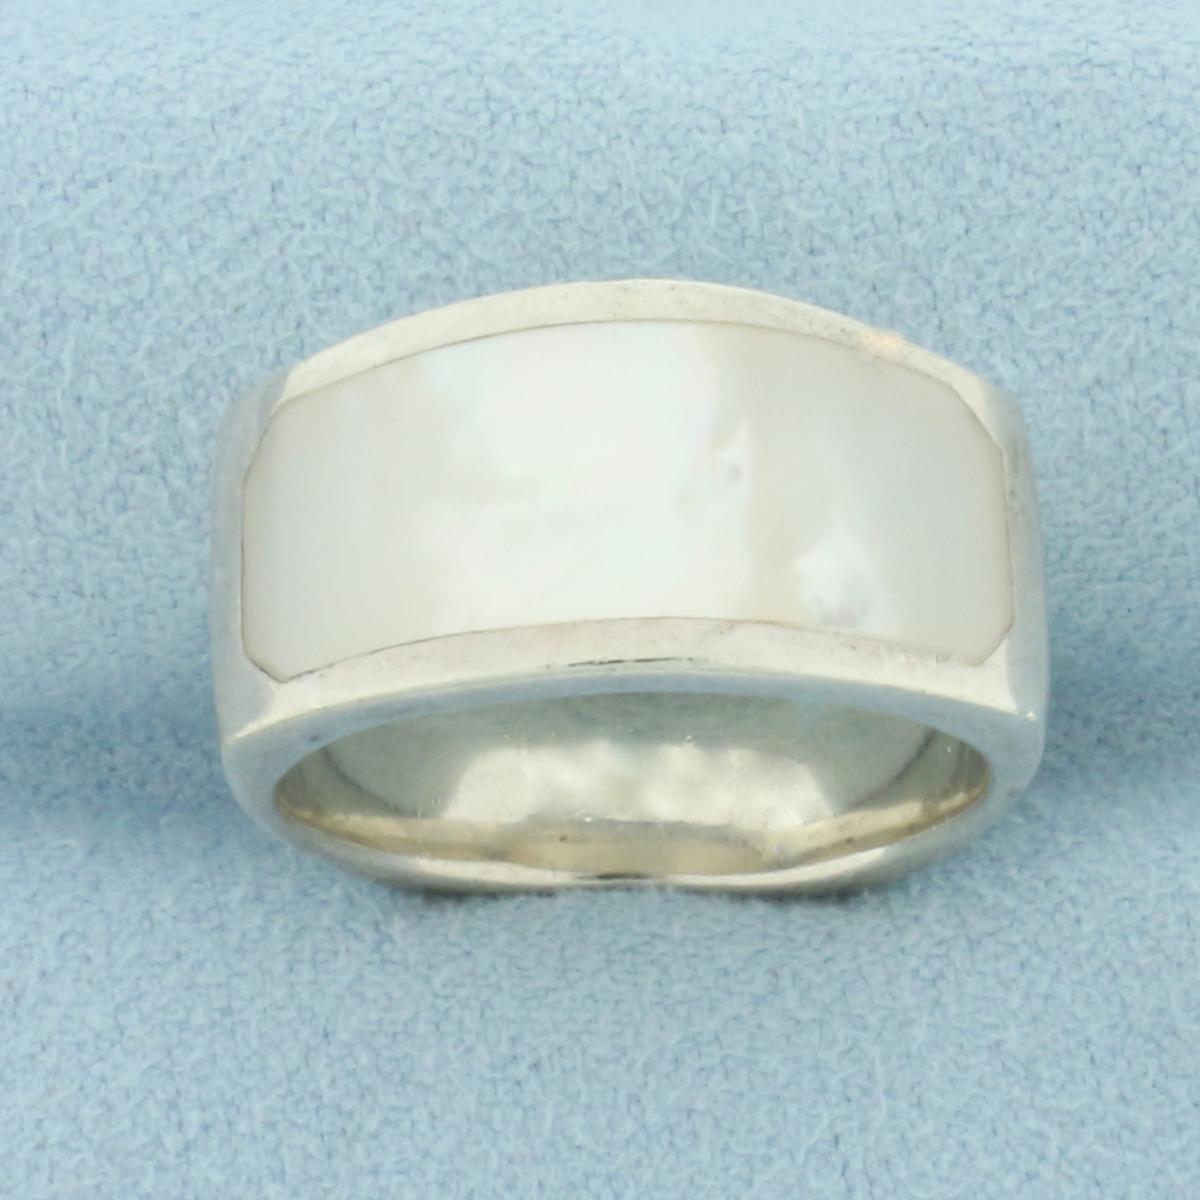 Mother Of Pearl Inlay Modern Ring In Sterling Silver